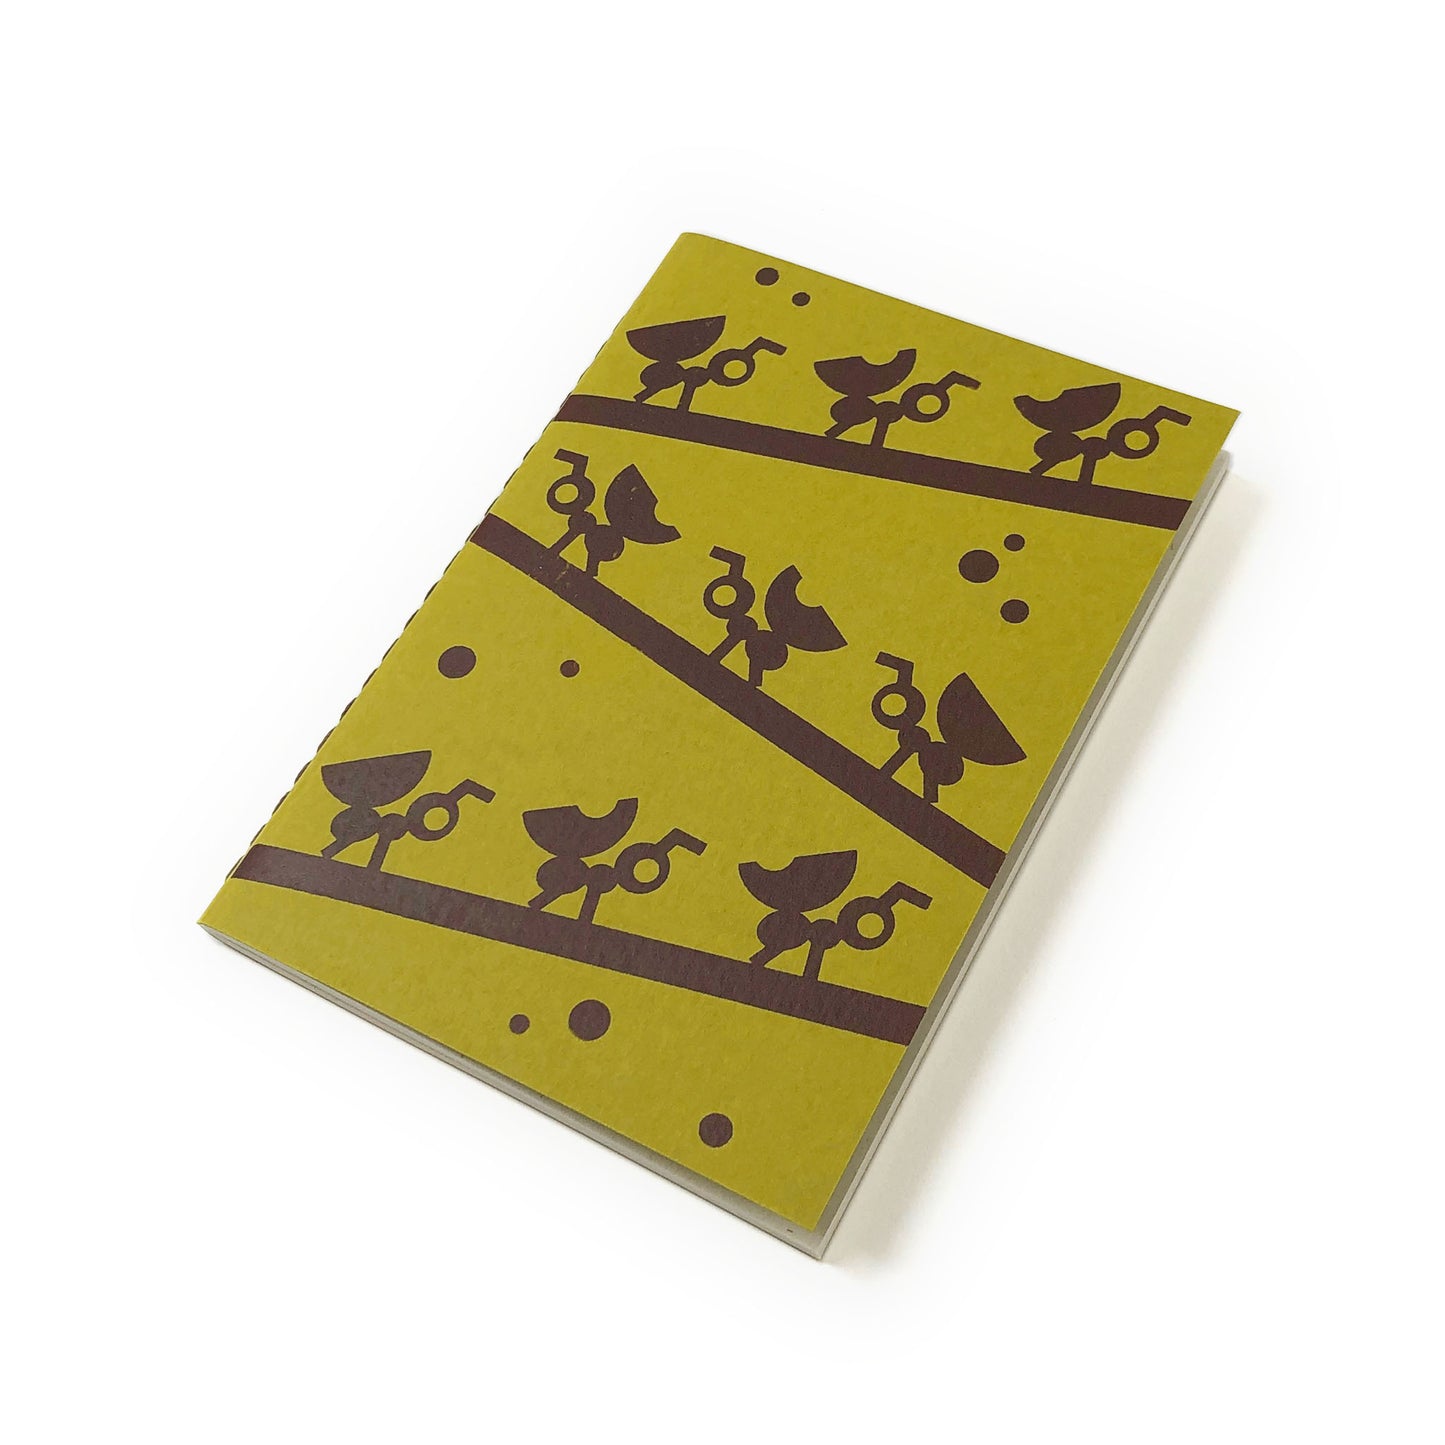 Green notebook with illustration of ants on branches and a stitched spine.